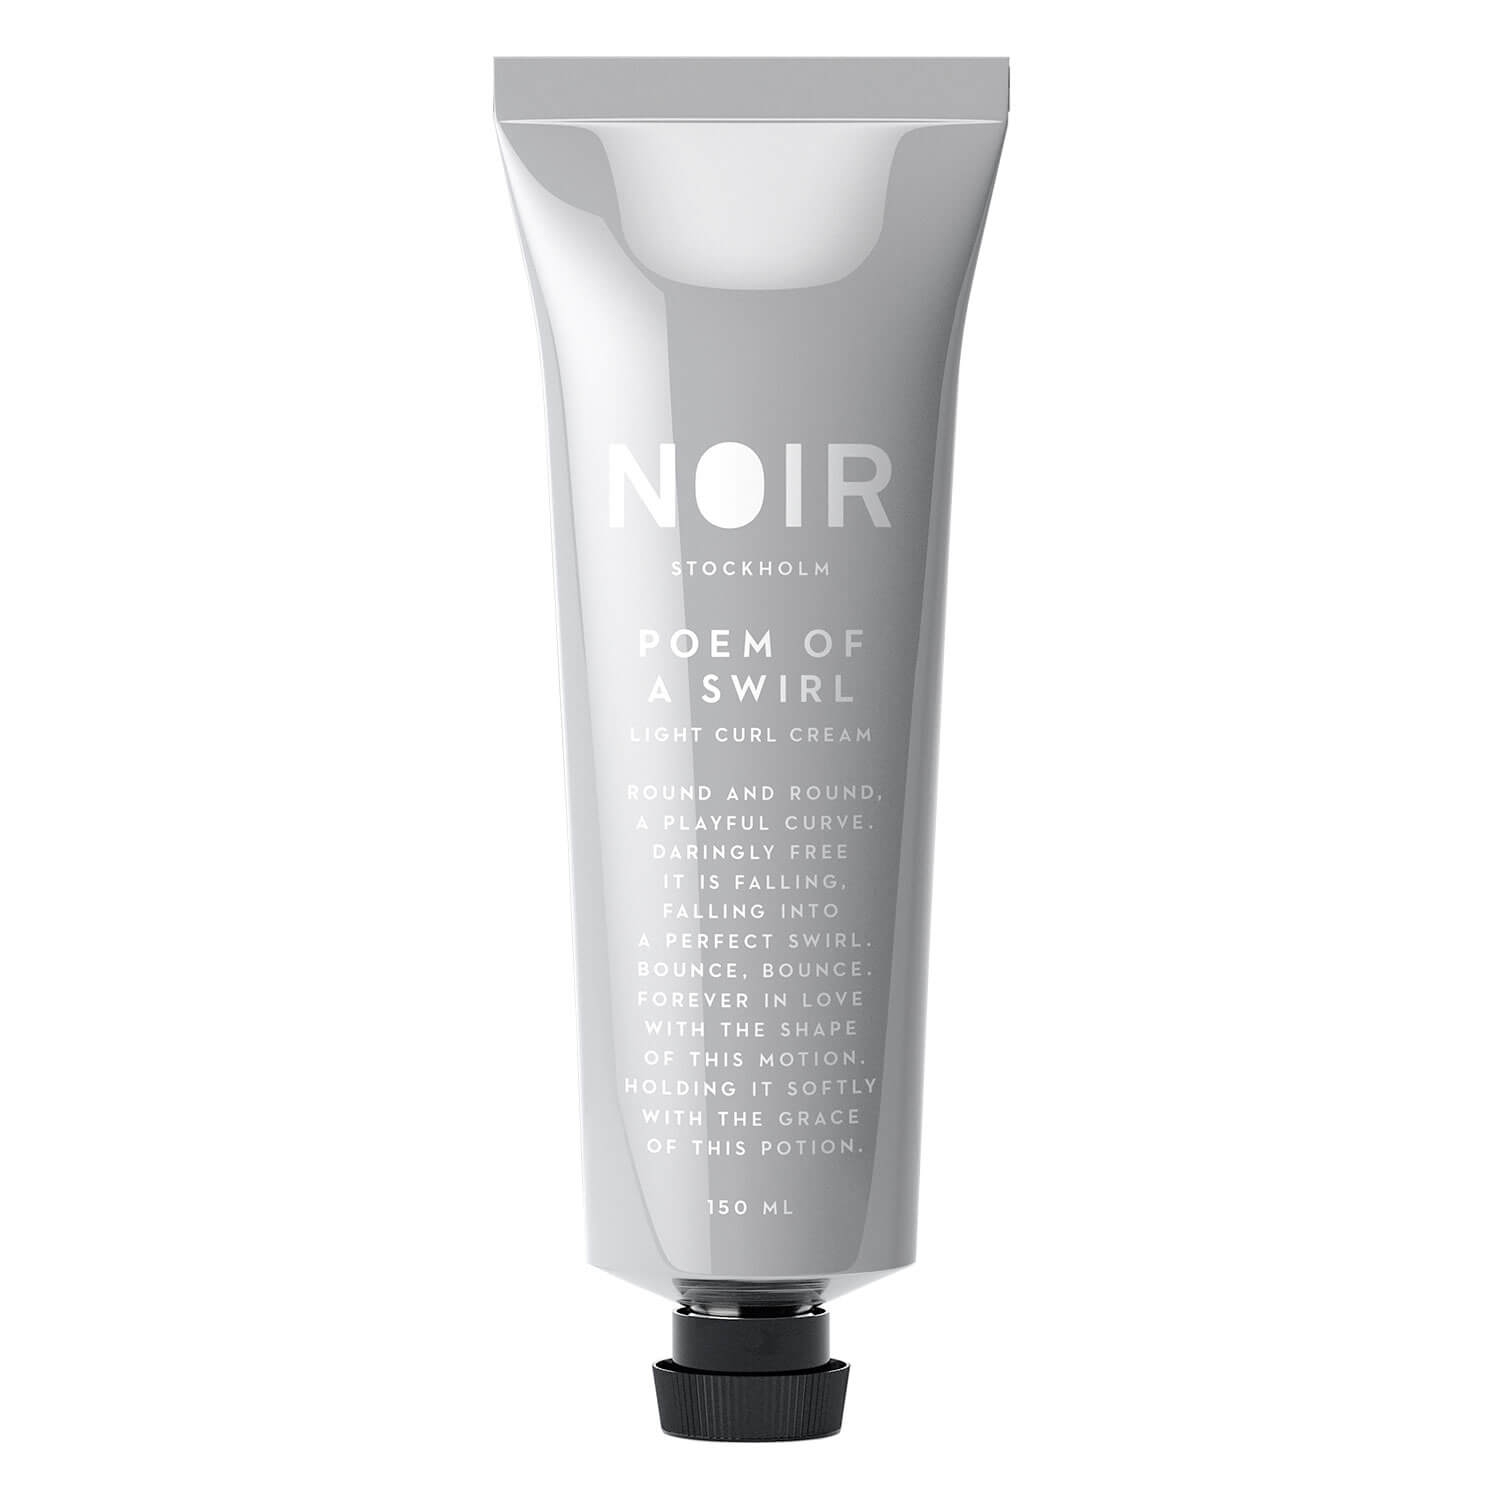 Product image from NOIR - Poem of a Swirl Light Curl Cream